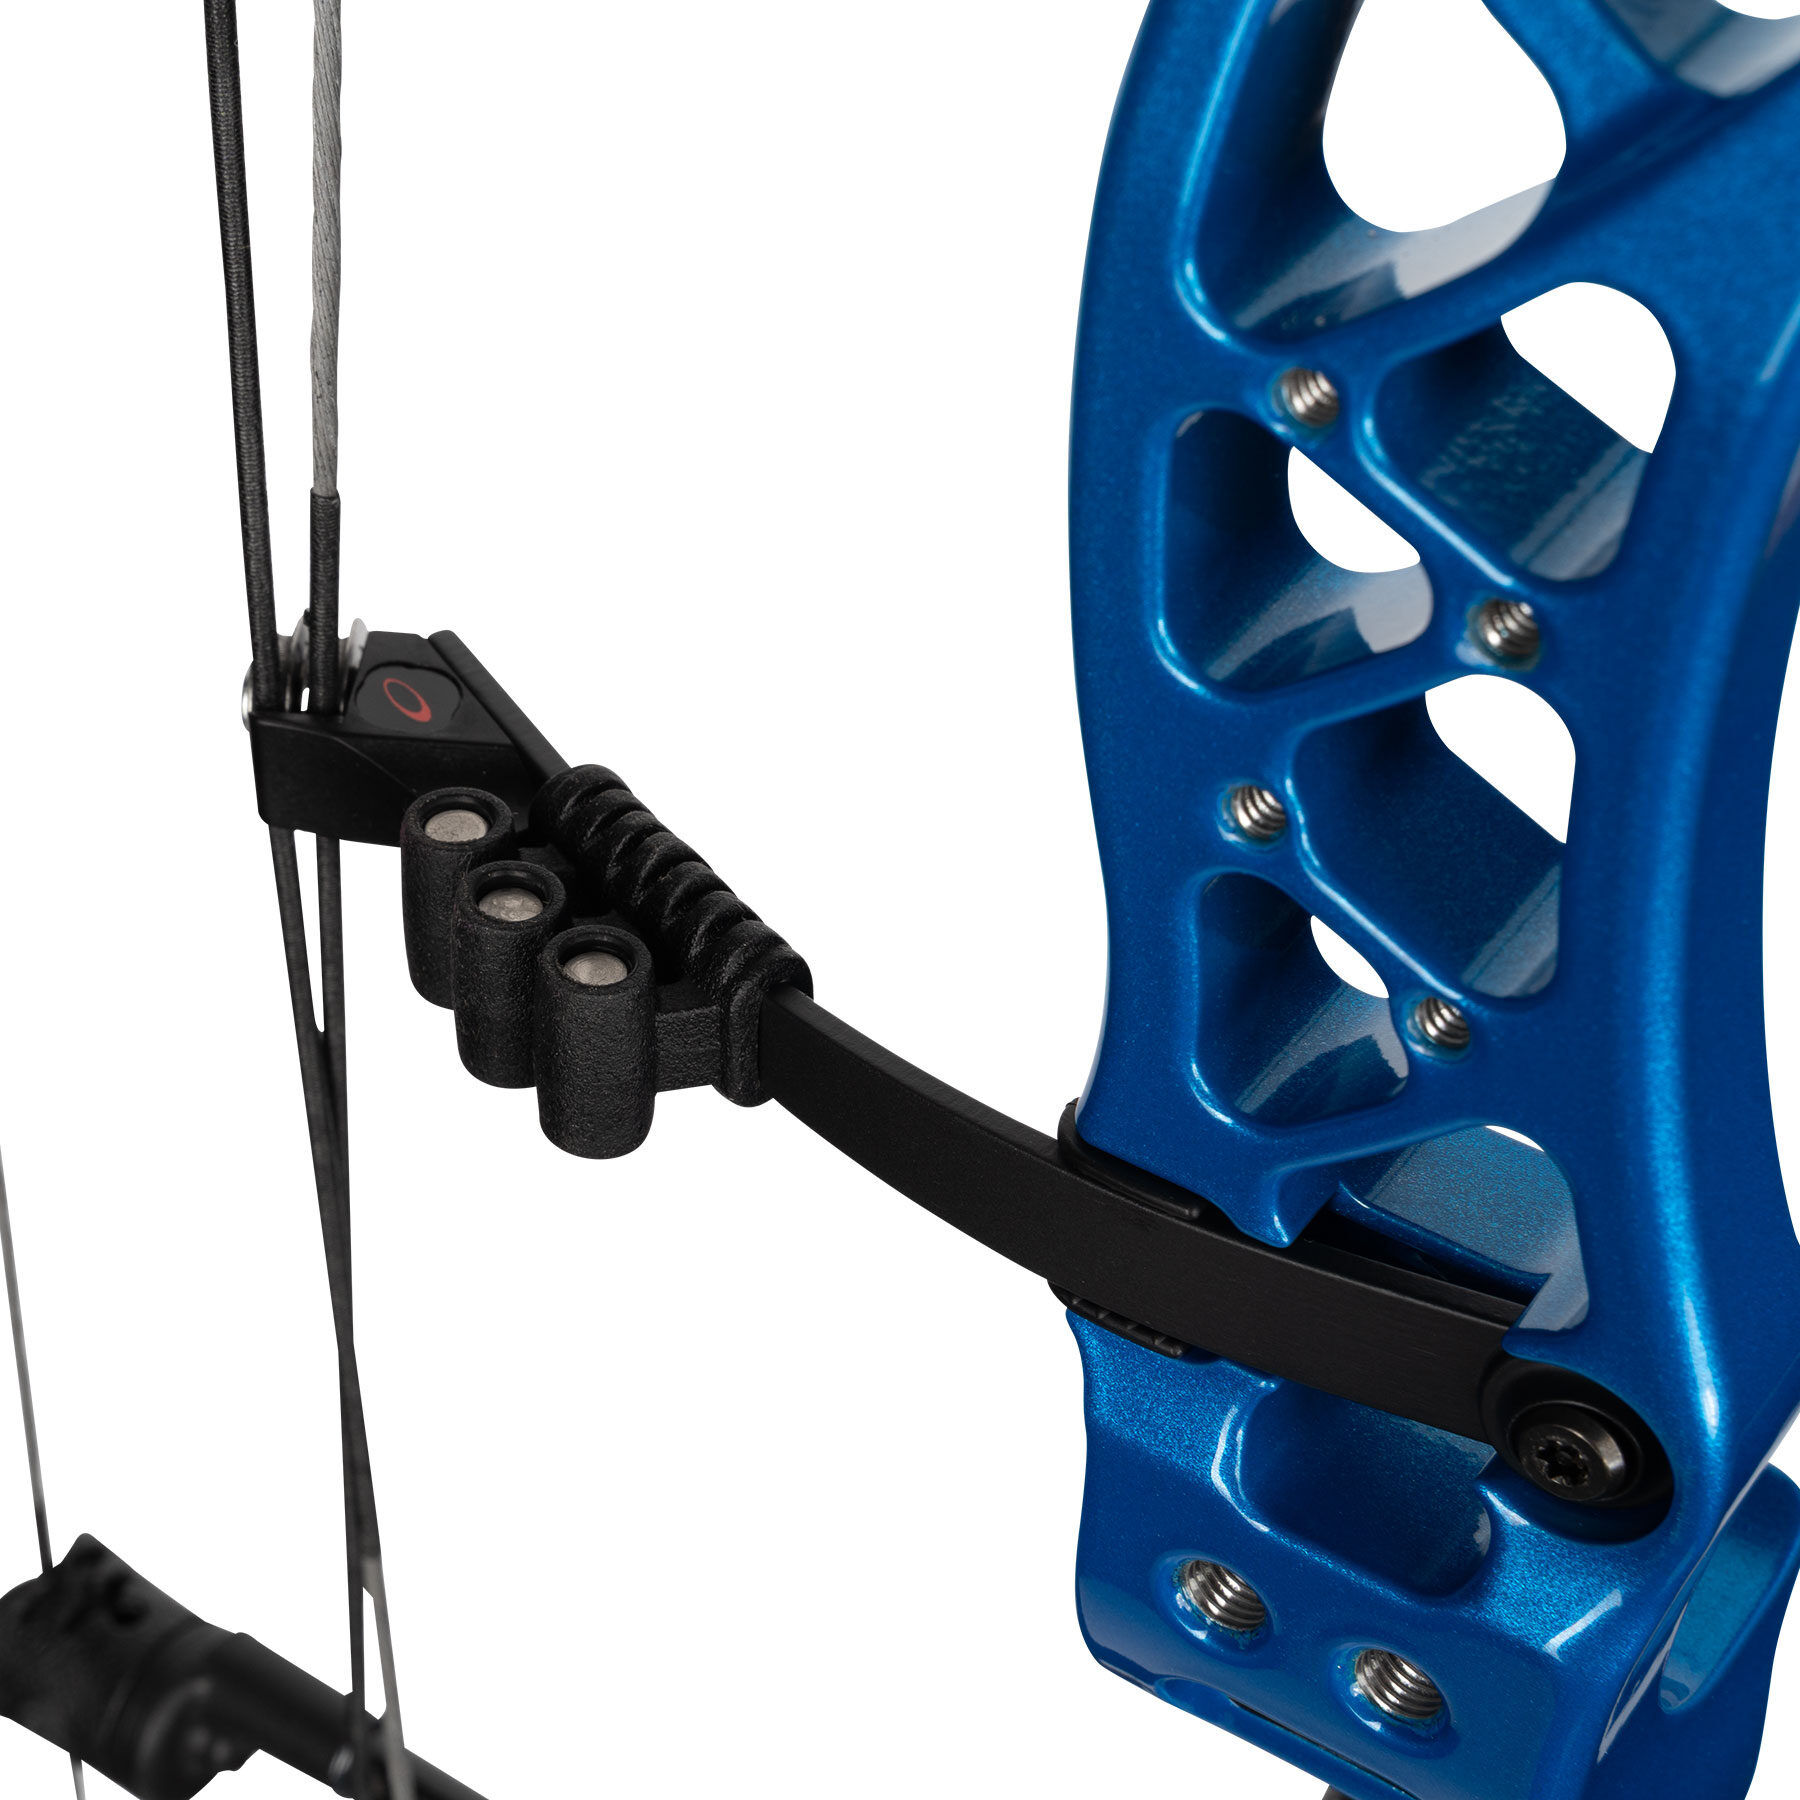 cable guard of Reckoning Gen2 39 compound bow